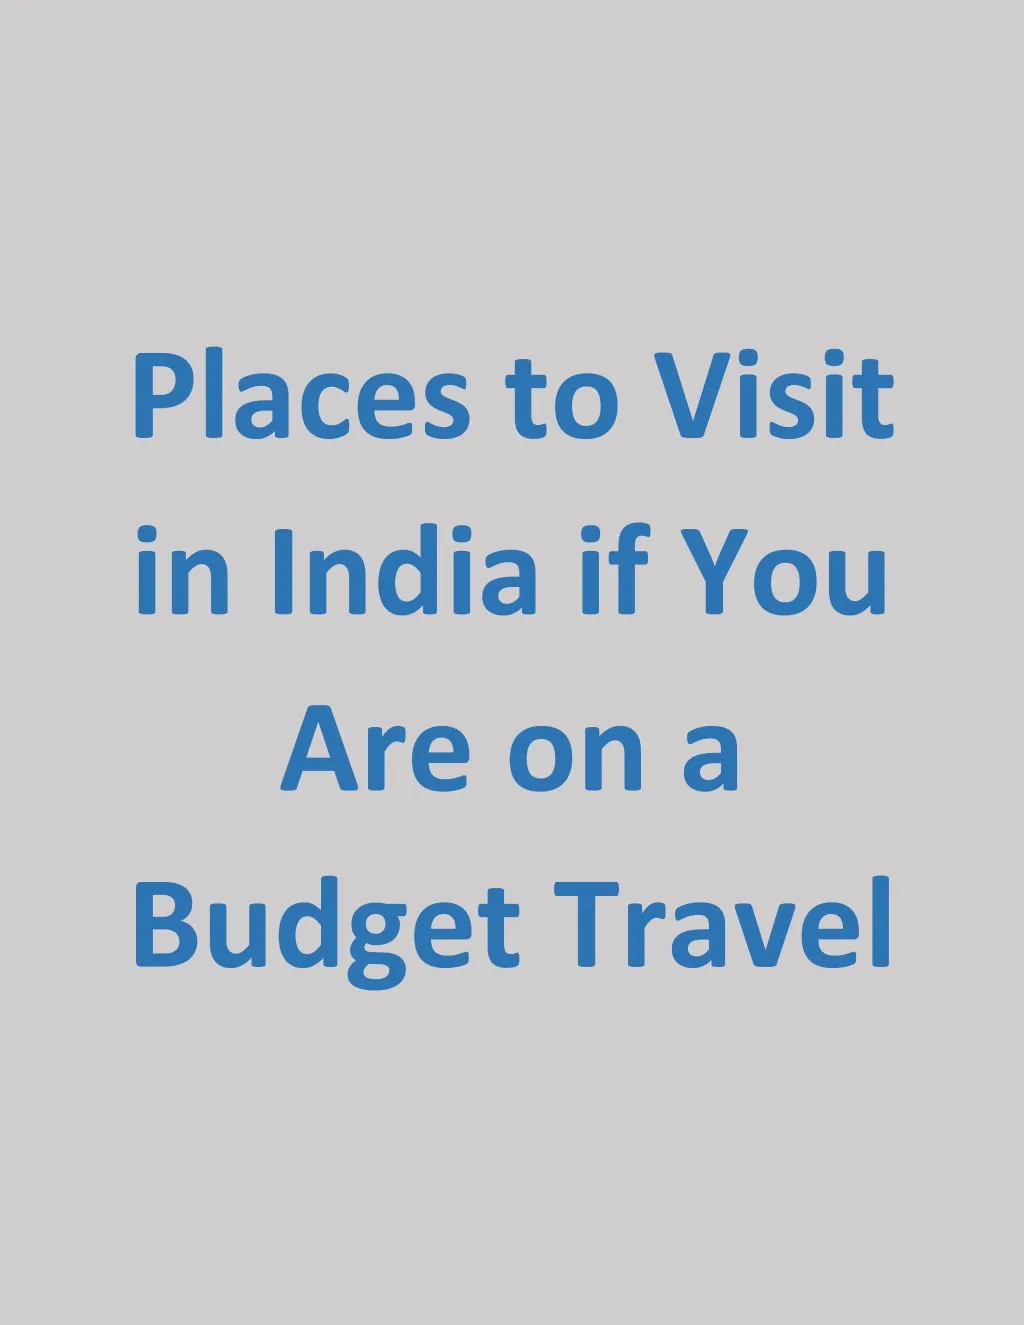 places to visit in india if you are on a budget